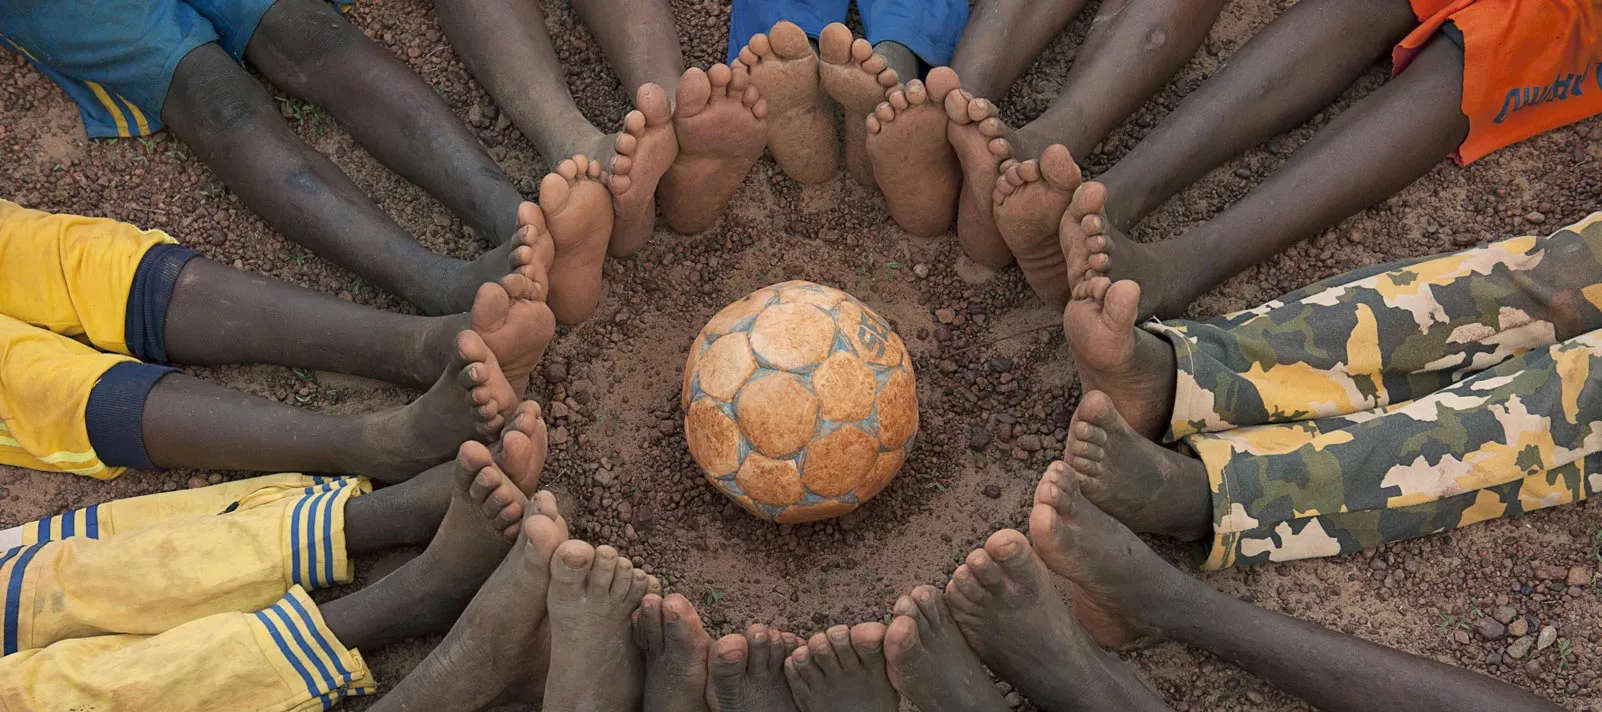 Circle of boys' bare feet with the soccer ball at a UNICEF Child-Friendly Space in Ouahigouya, Burkina Faso.